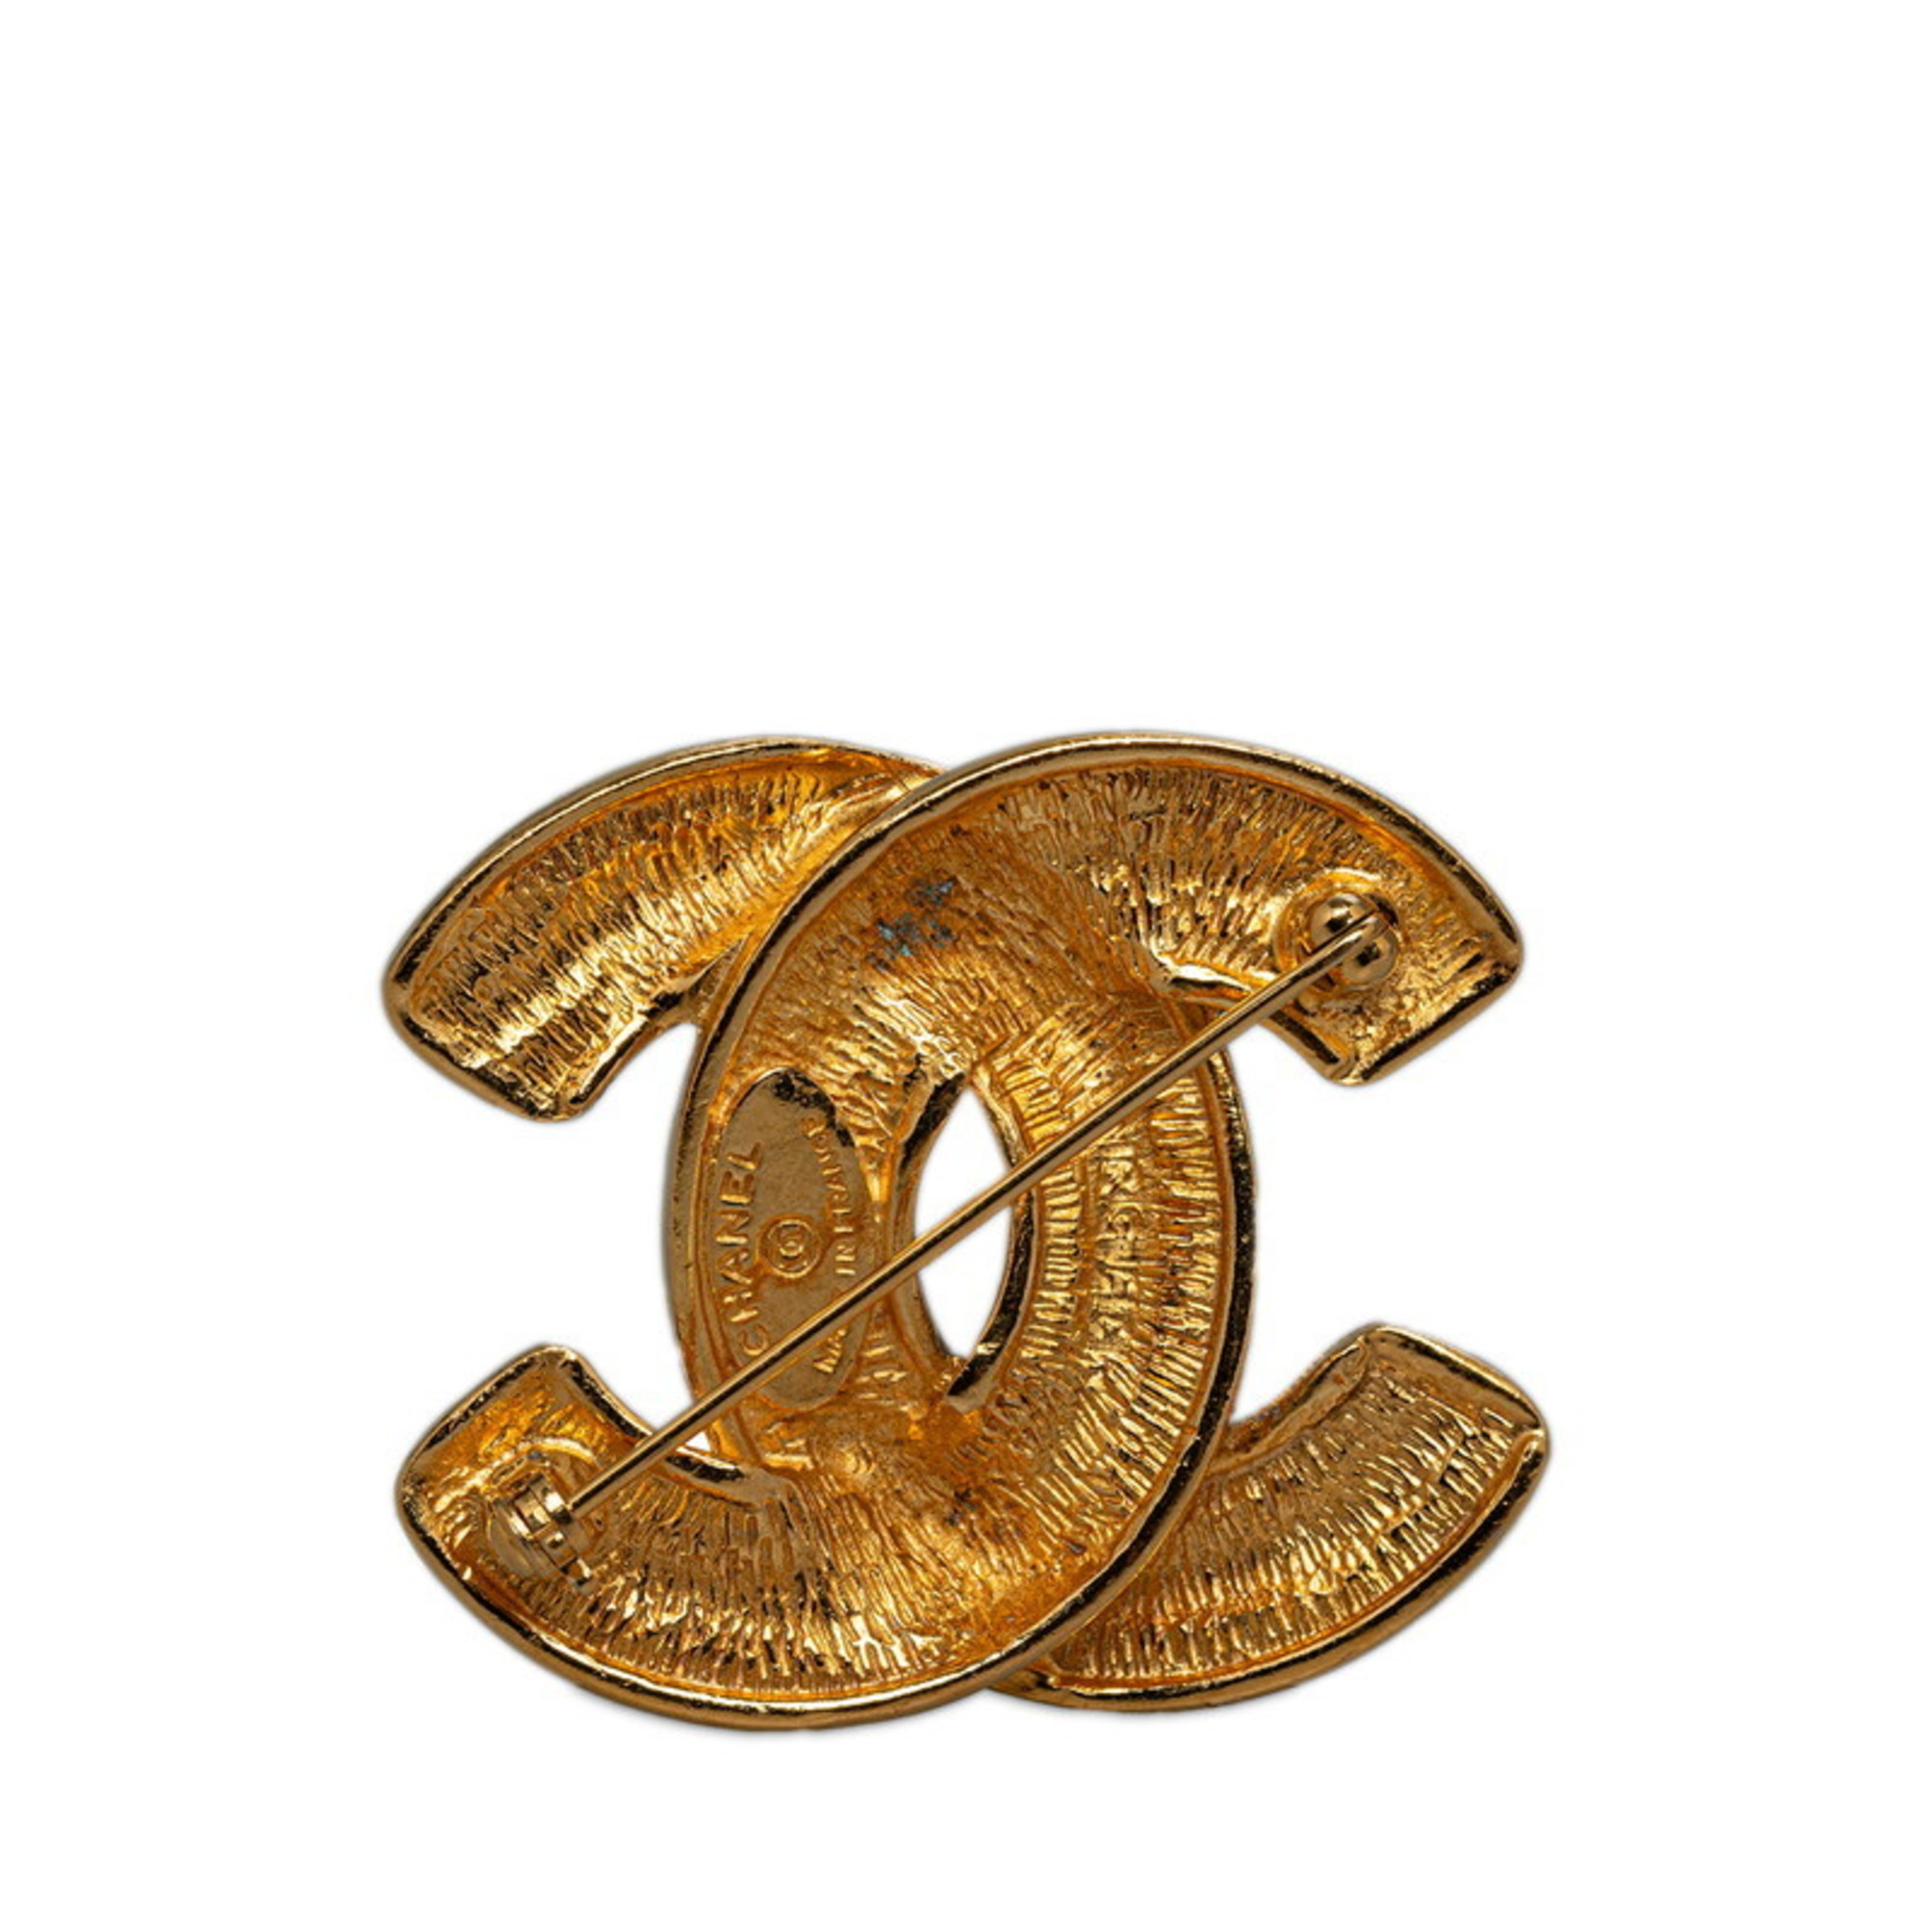 Chanel Matelasse Coco Mark Brooch Gold Plated Women's CHANEL